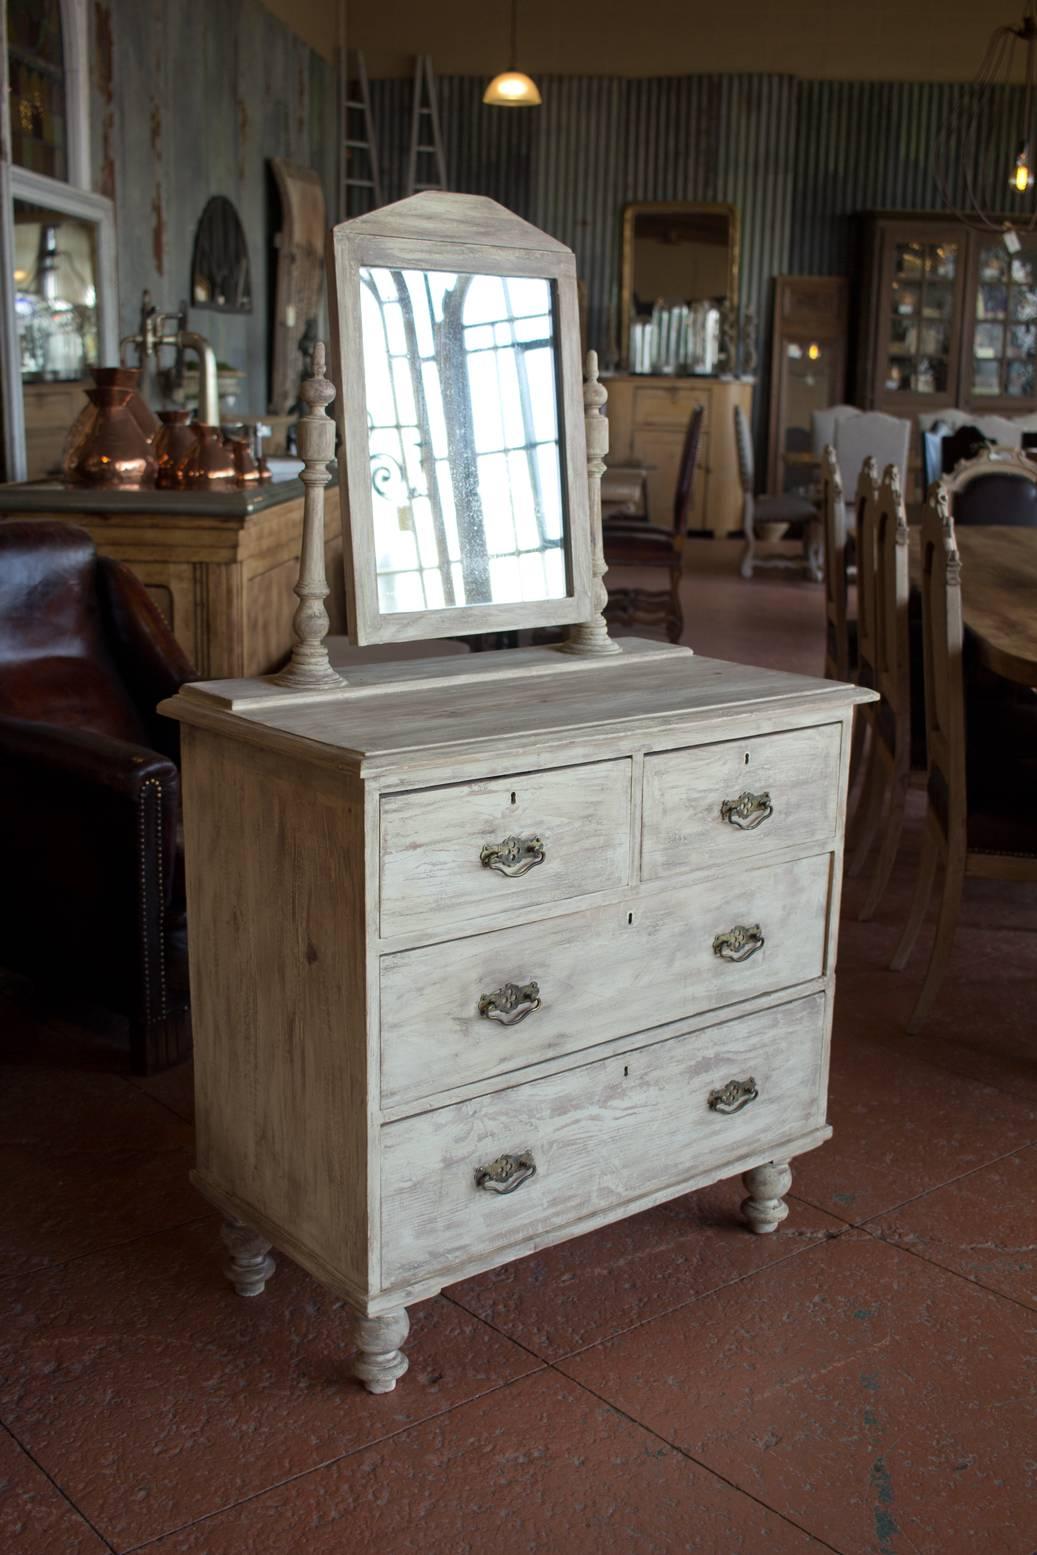 Antique petite French country pine chest of drawers with its original distressed mirror and original brass drawer pulls on beautiful turned feet. It has a lovely newer paint finish. Could be retrofitted with a small sink for a powder